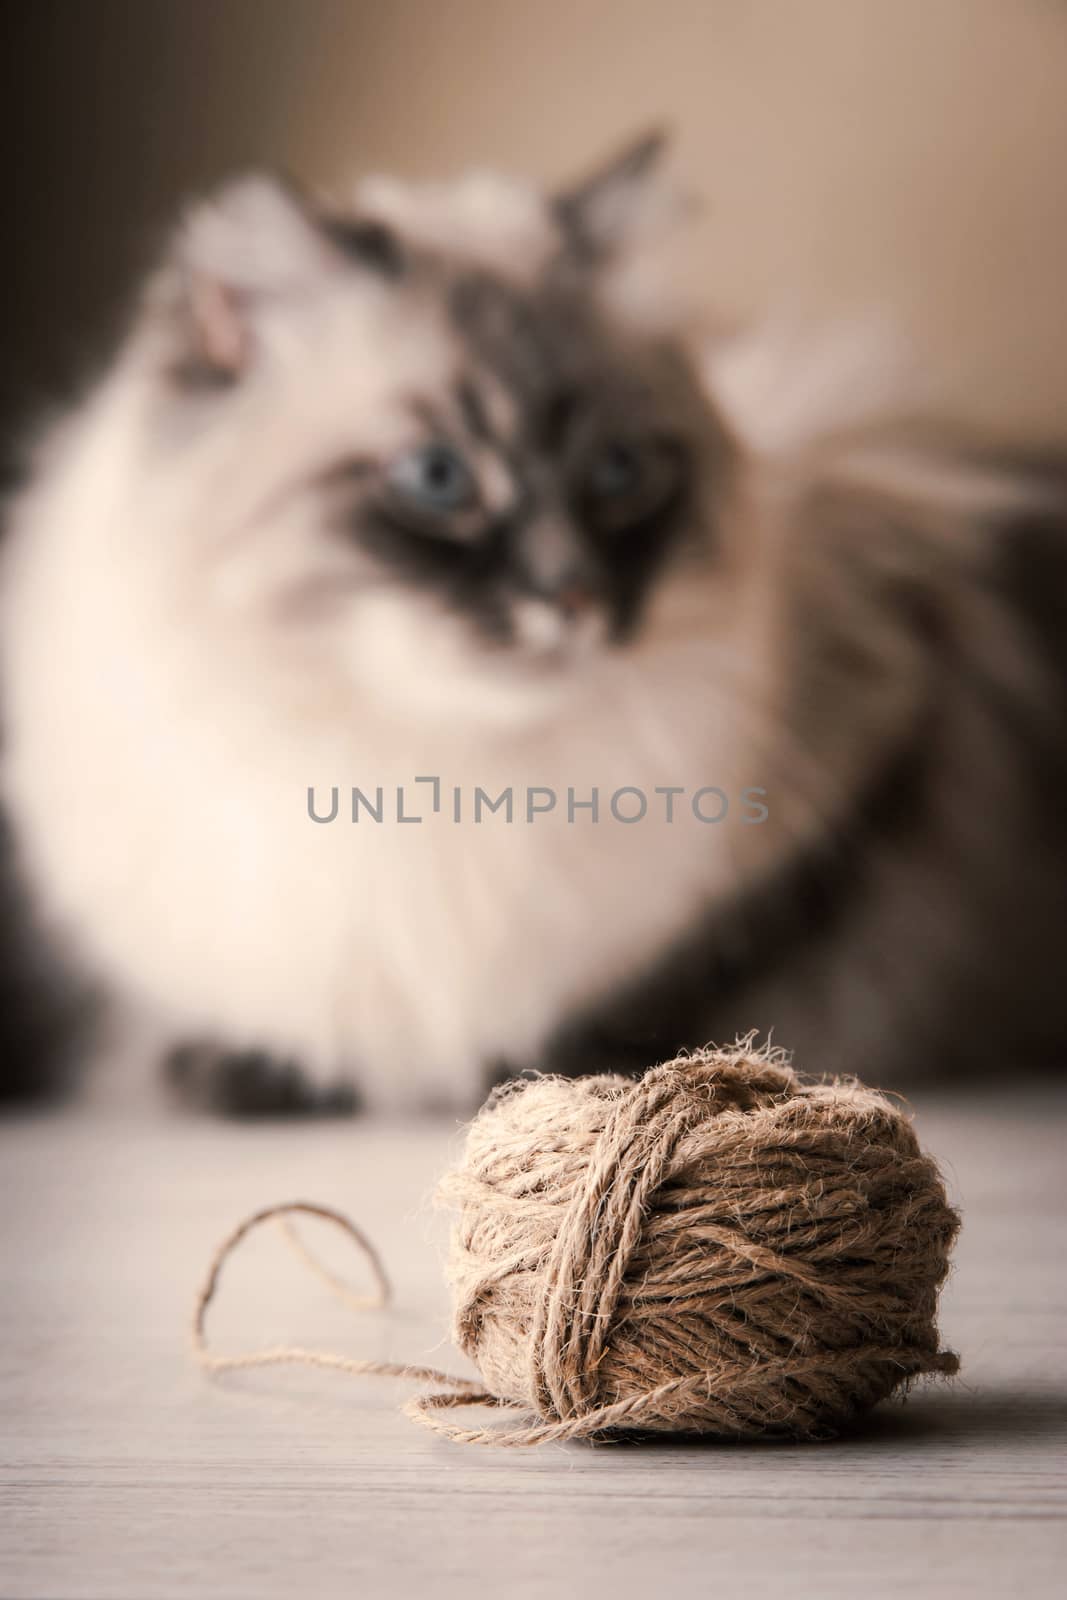 Blurred Siberian cat with clew